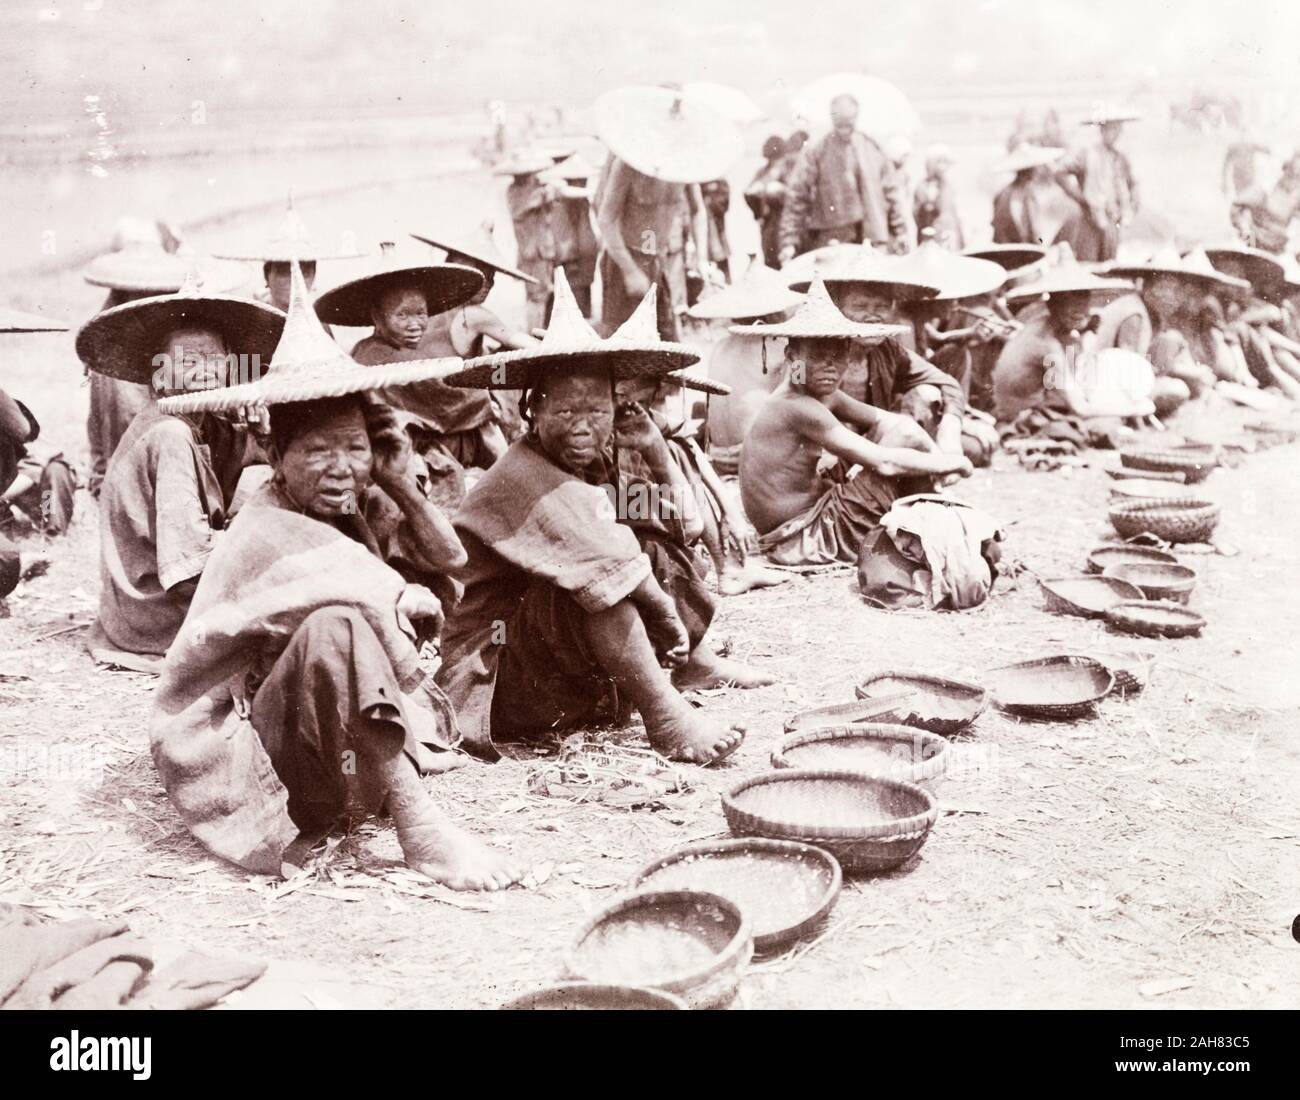 China, A number of mendicants, some of whom are suffering from leprosy, beg at the roadside with their woven bowls. Both men and women wear wide-brimmed conical hats. Original manuscript caption: Beggars and Lepers. Shikwan, circa 1905. 1998/028/1/1/27. Stock Photo